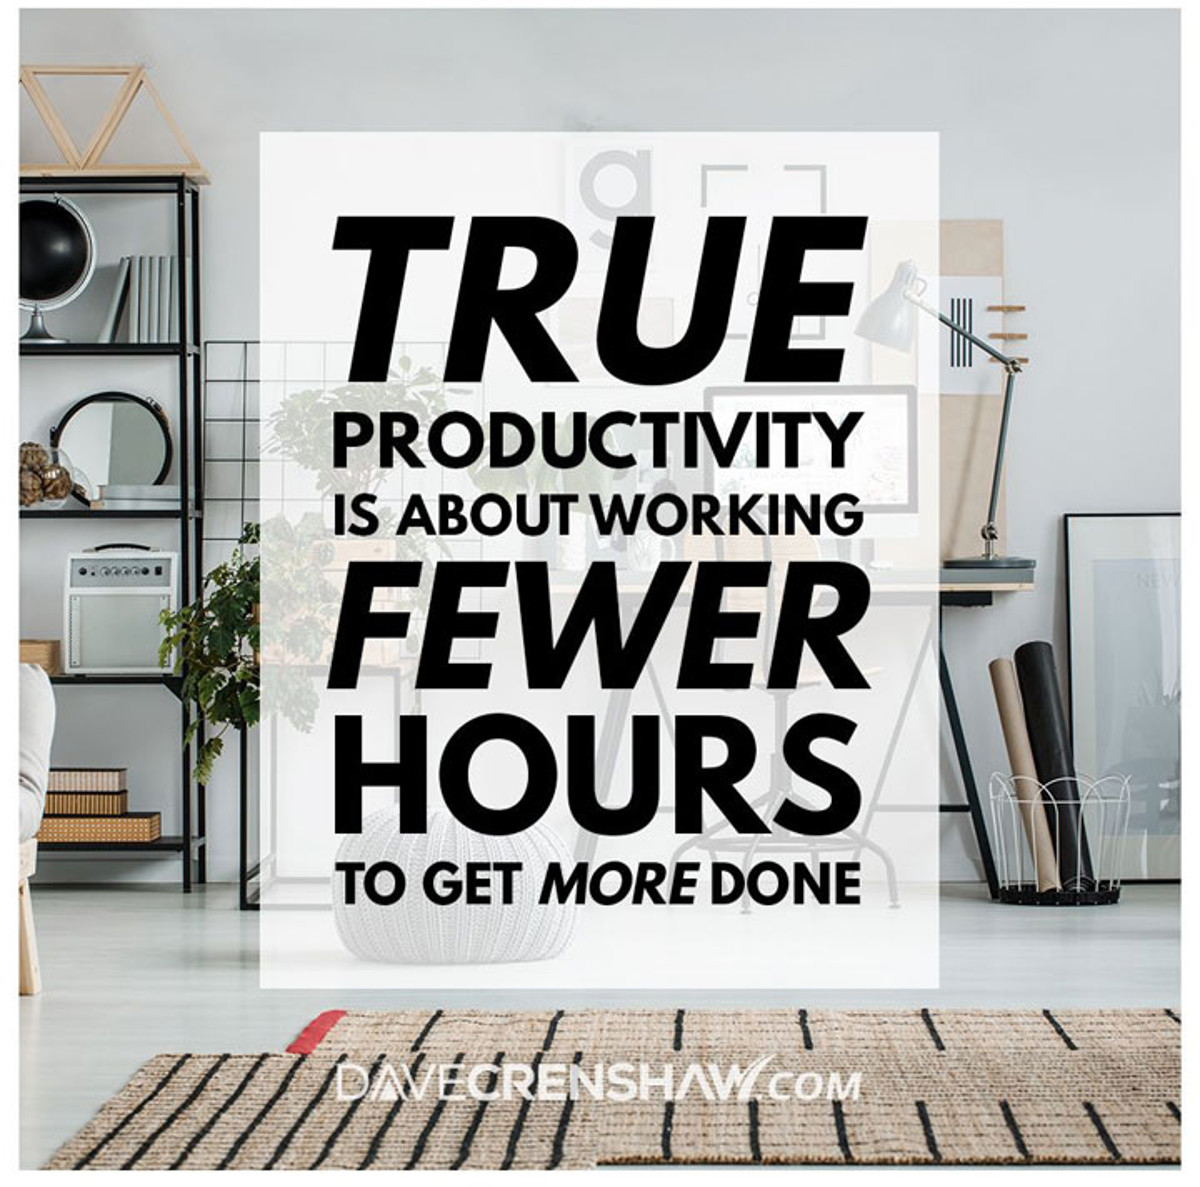 True productivity is about working fewer hours to get more done